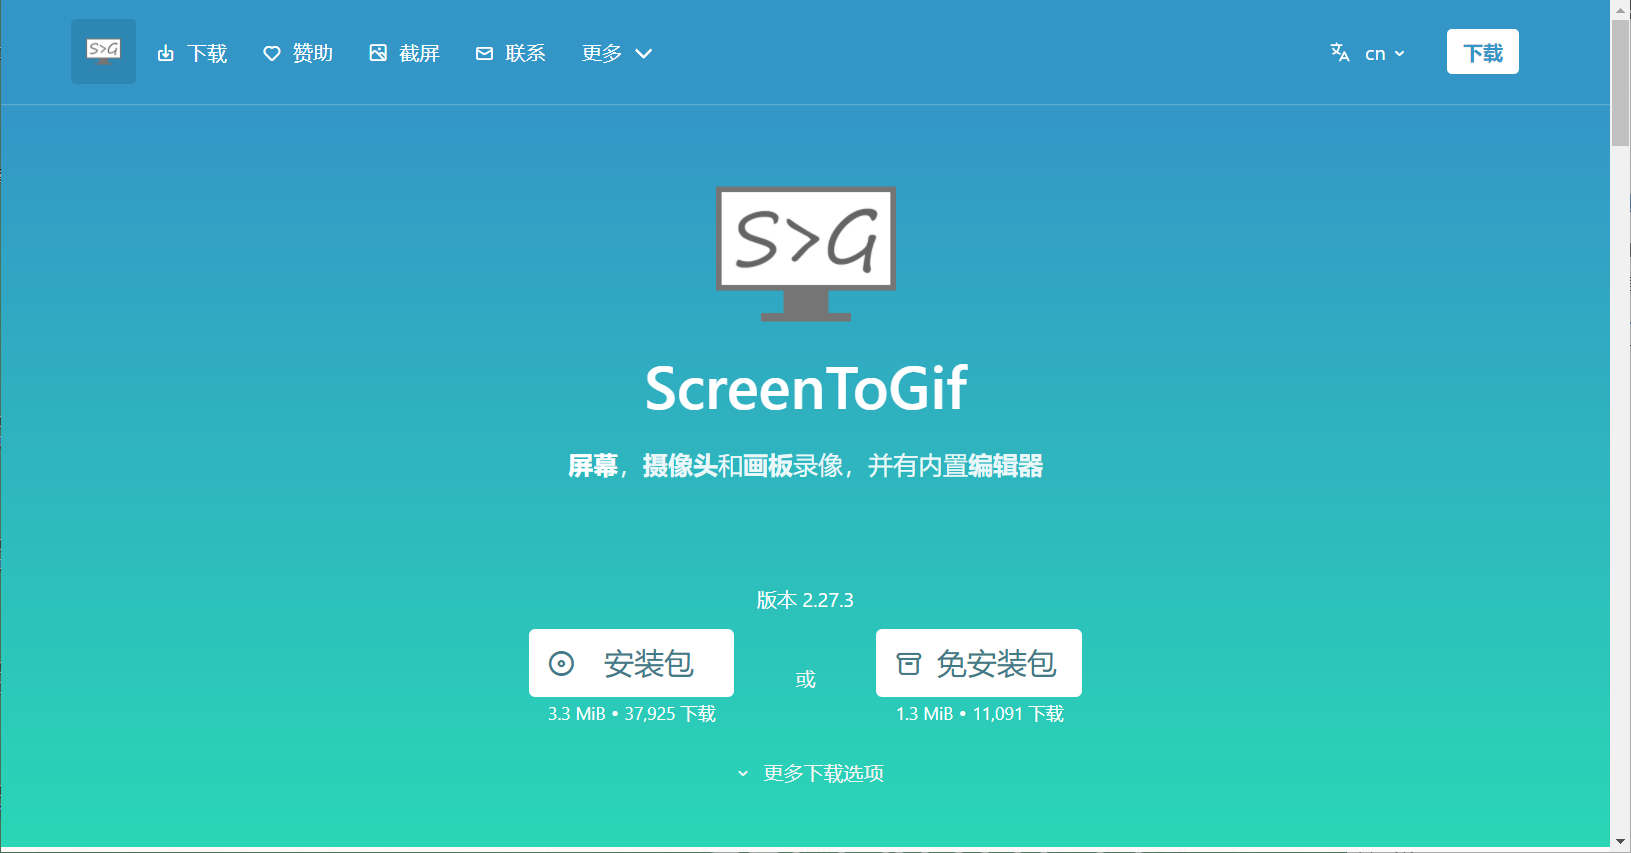 ScreenToGif 2.39 instal the new for ios